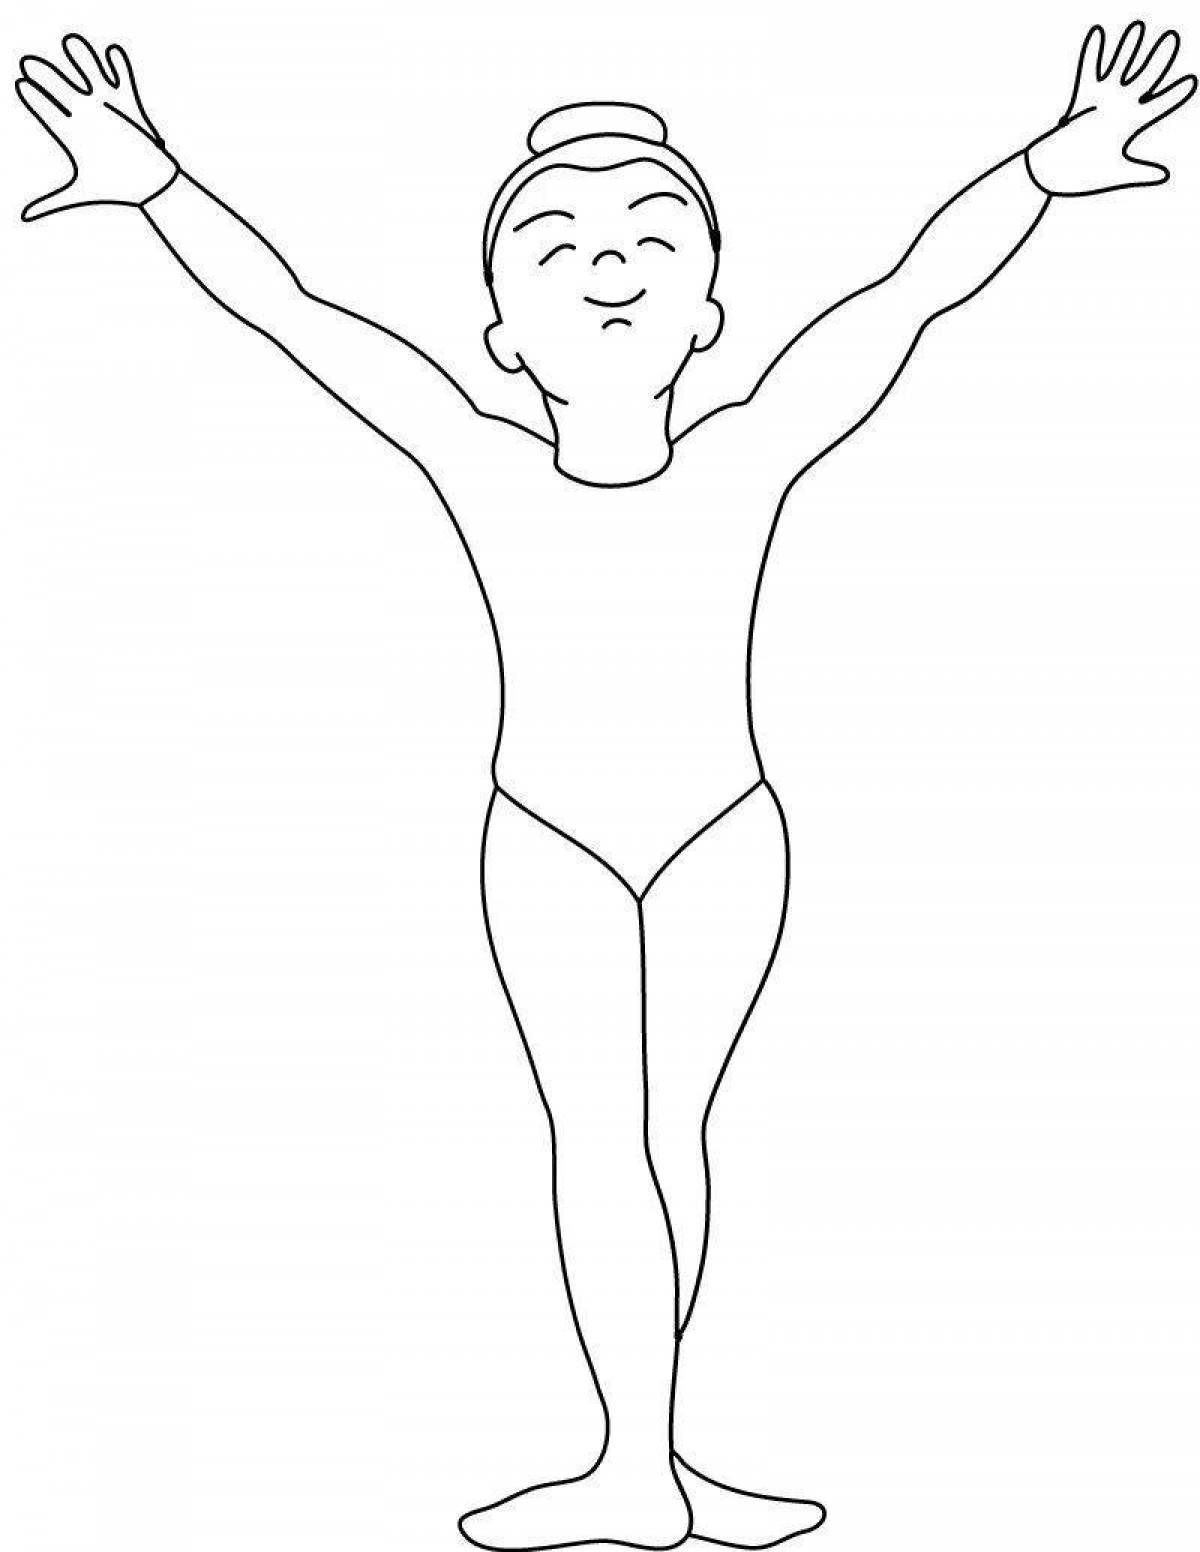 Exciting gymnast coloring book for kids